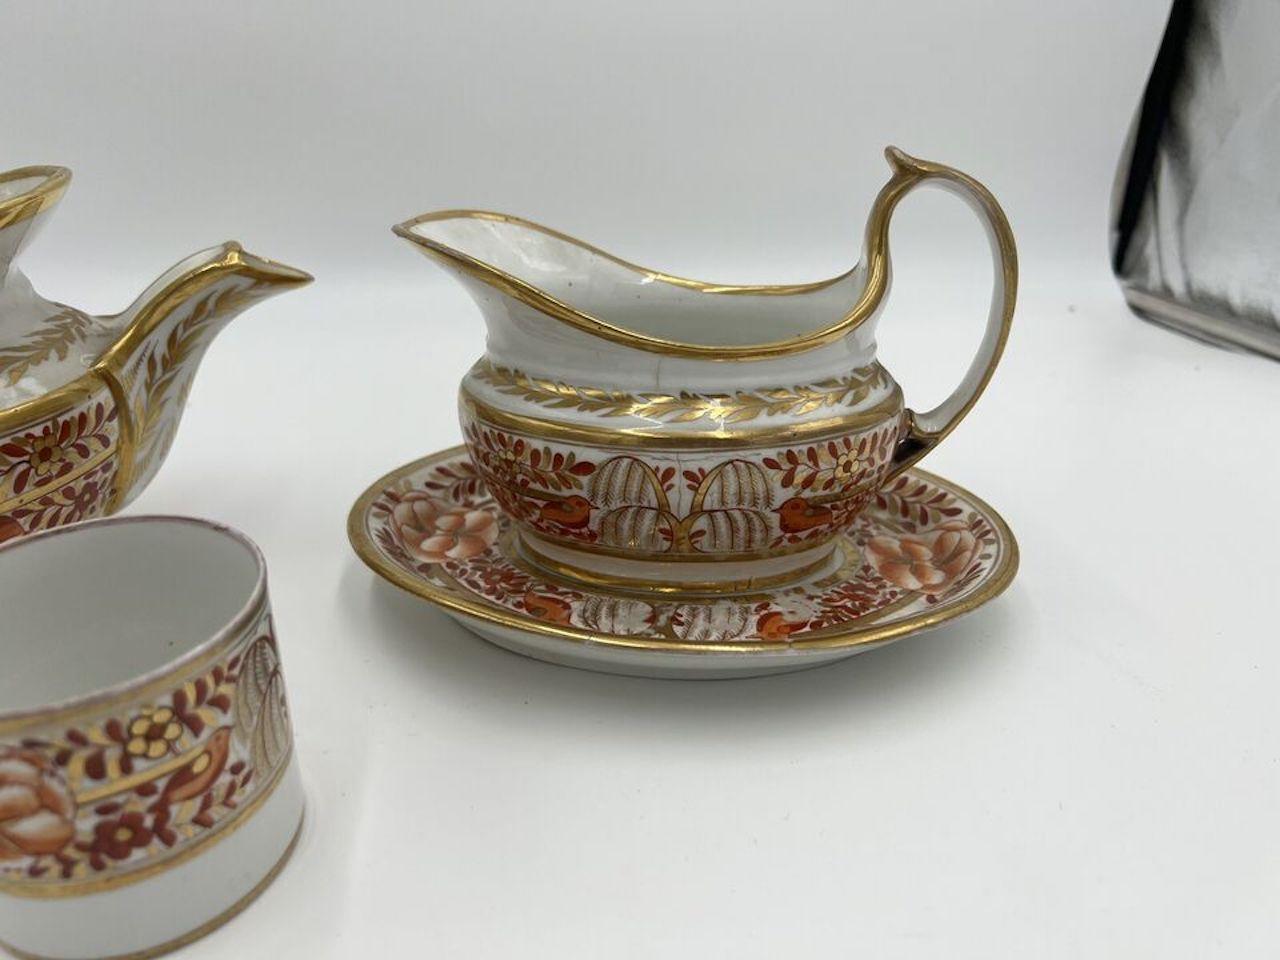 Chinoiserie Fine 4 Pc, Spode Porcelain Rust and Gilt Personal Tea Service C. 1820 For Sale